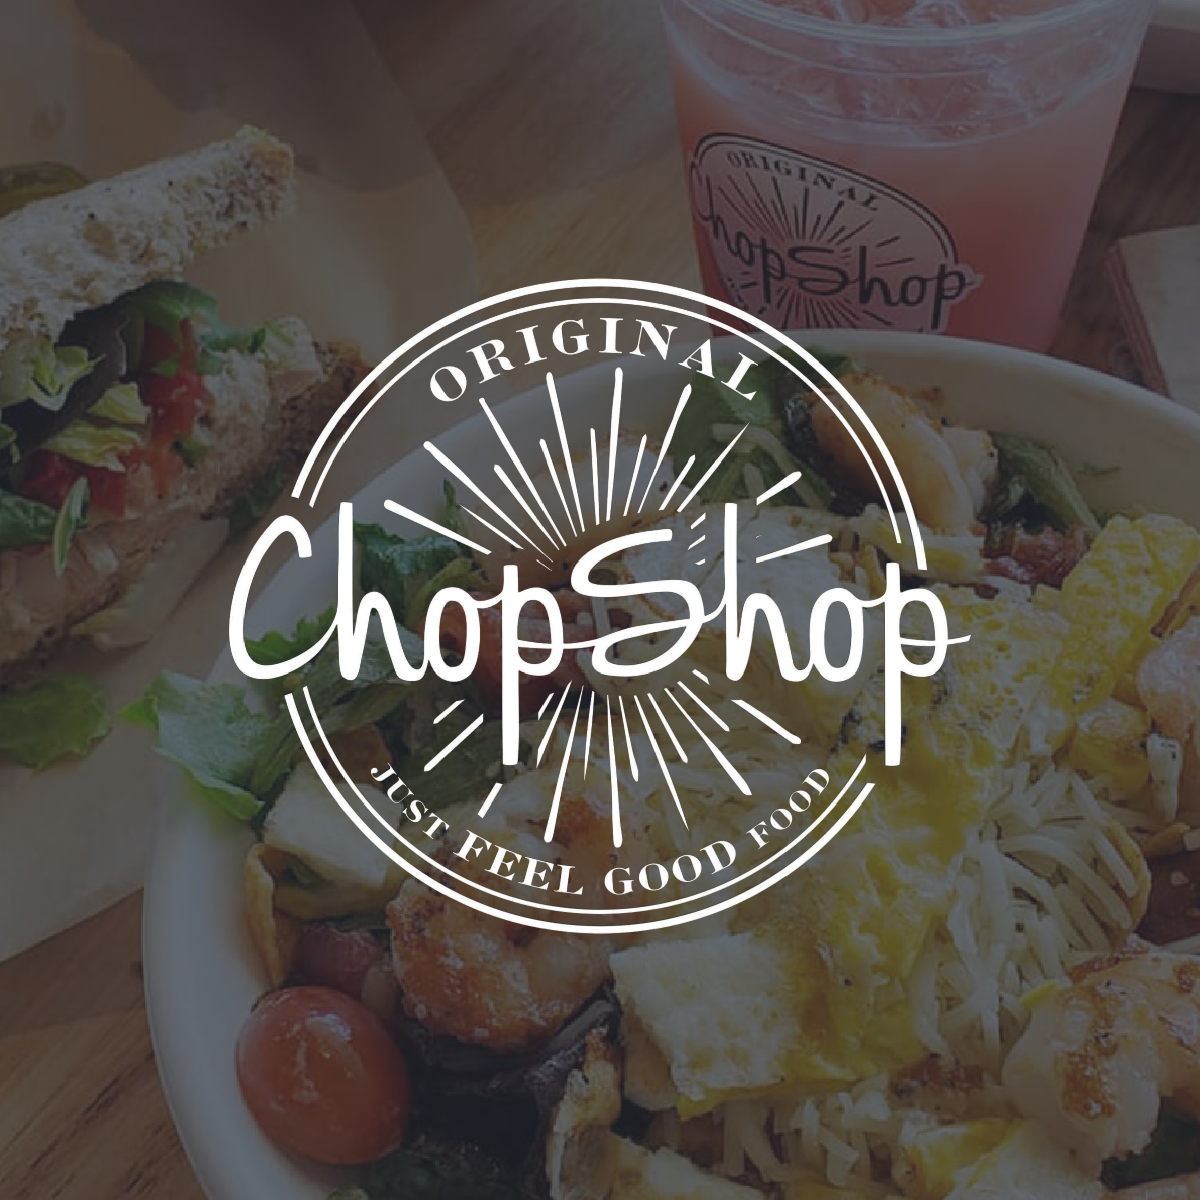 Client Spotlight: Chad Hohensee and The Original ChopShop